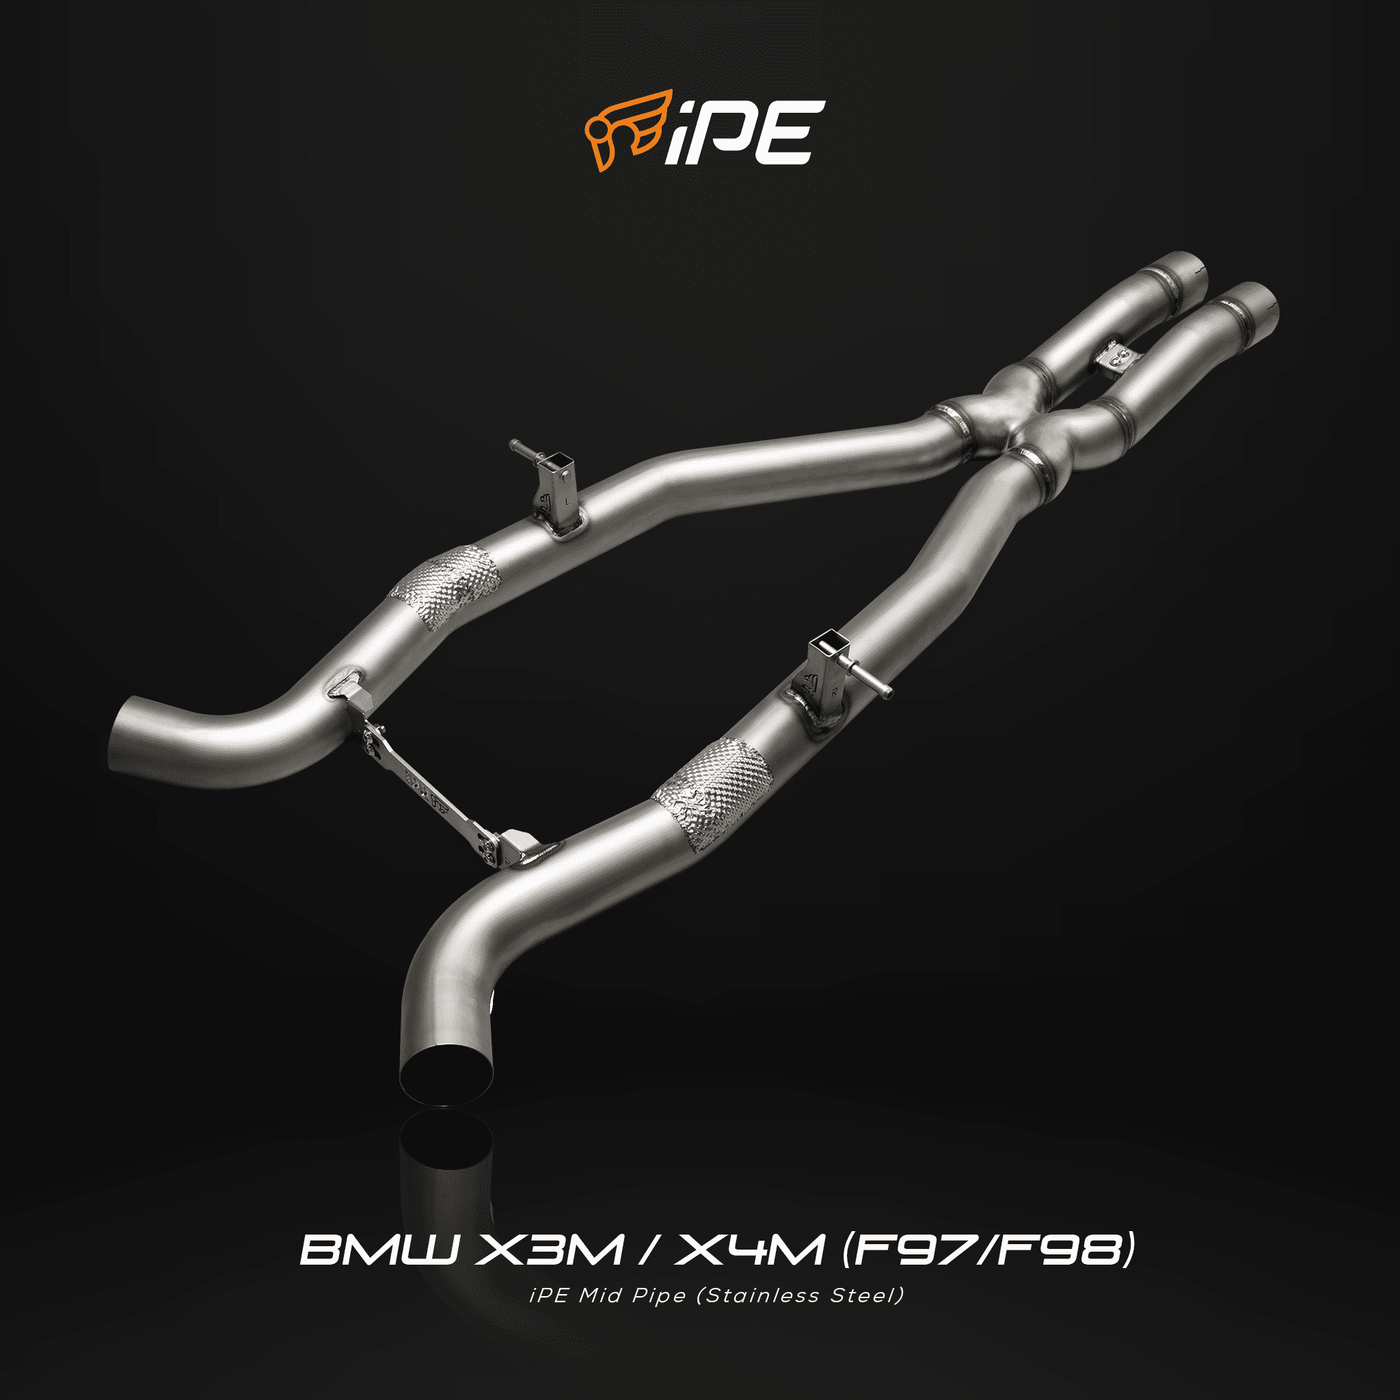 BMW X3M / X4M (F97 / F98) - Catback system - Stainless Steel - Midpipe